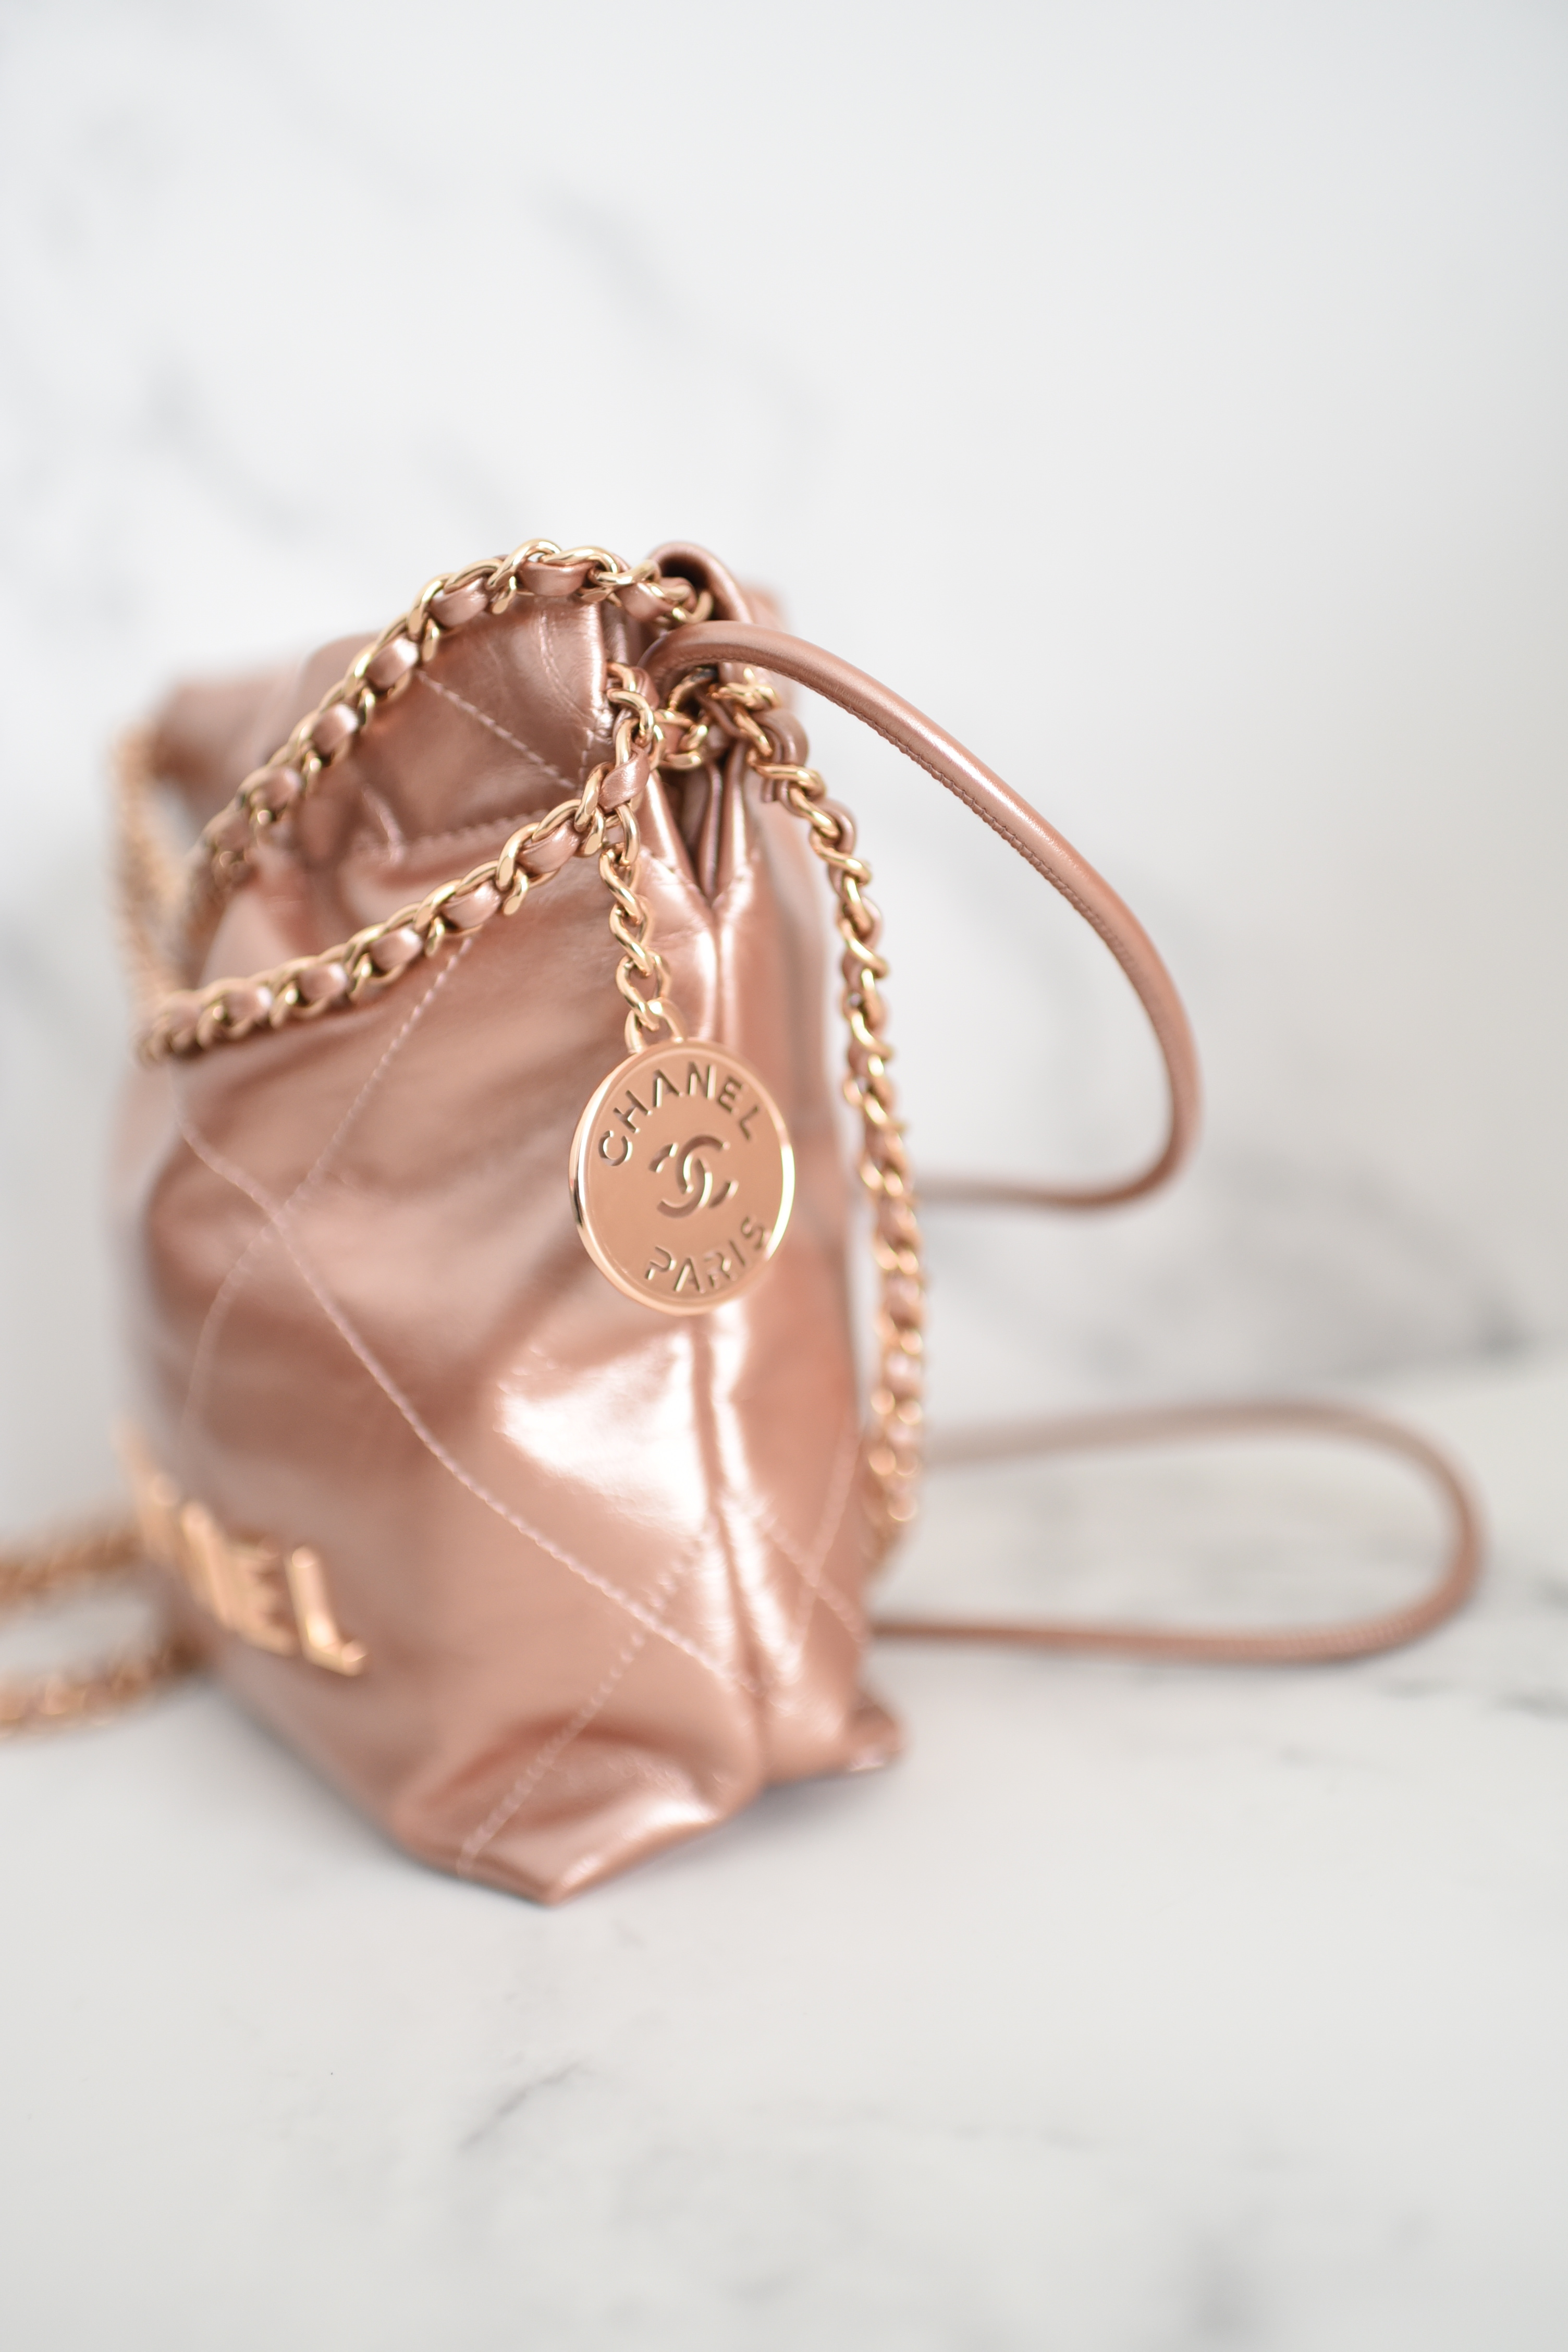 Chanel 22 Mini Quilted Hobo Tote, Rose Gold Calfskin with Gold Hardware,  New in Box MA001